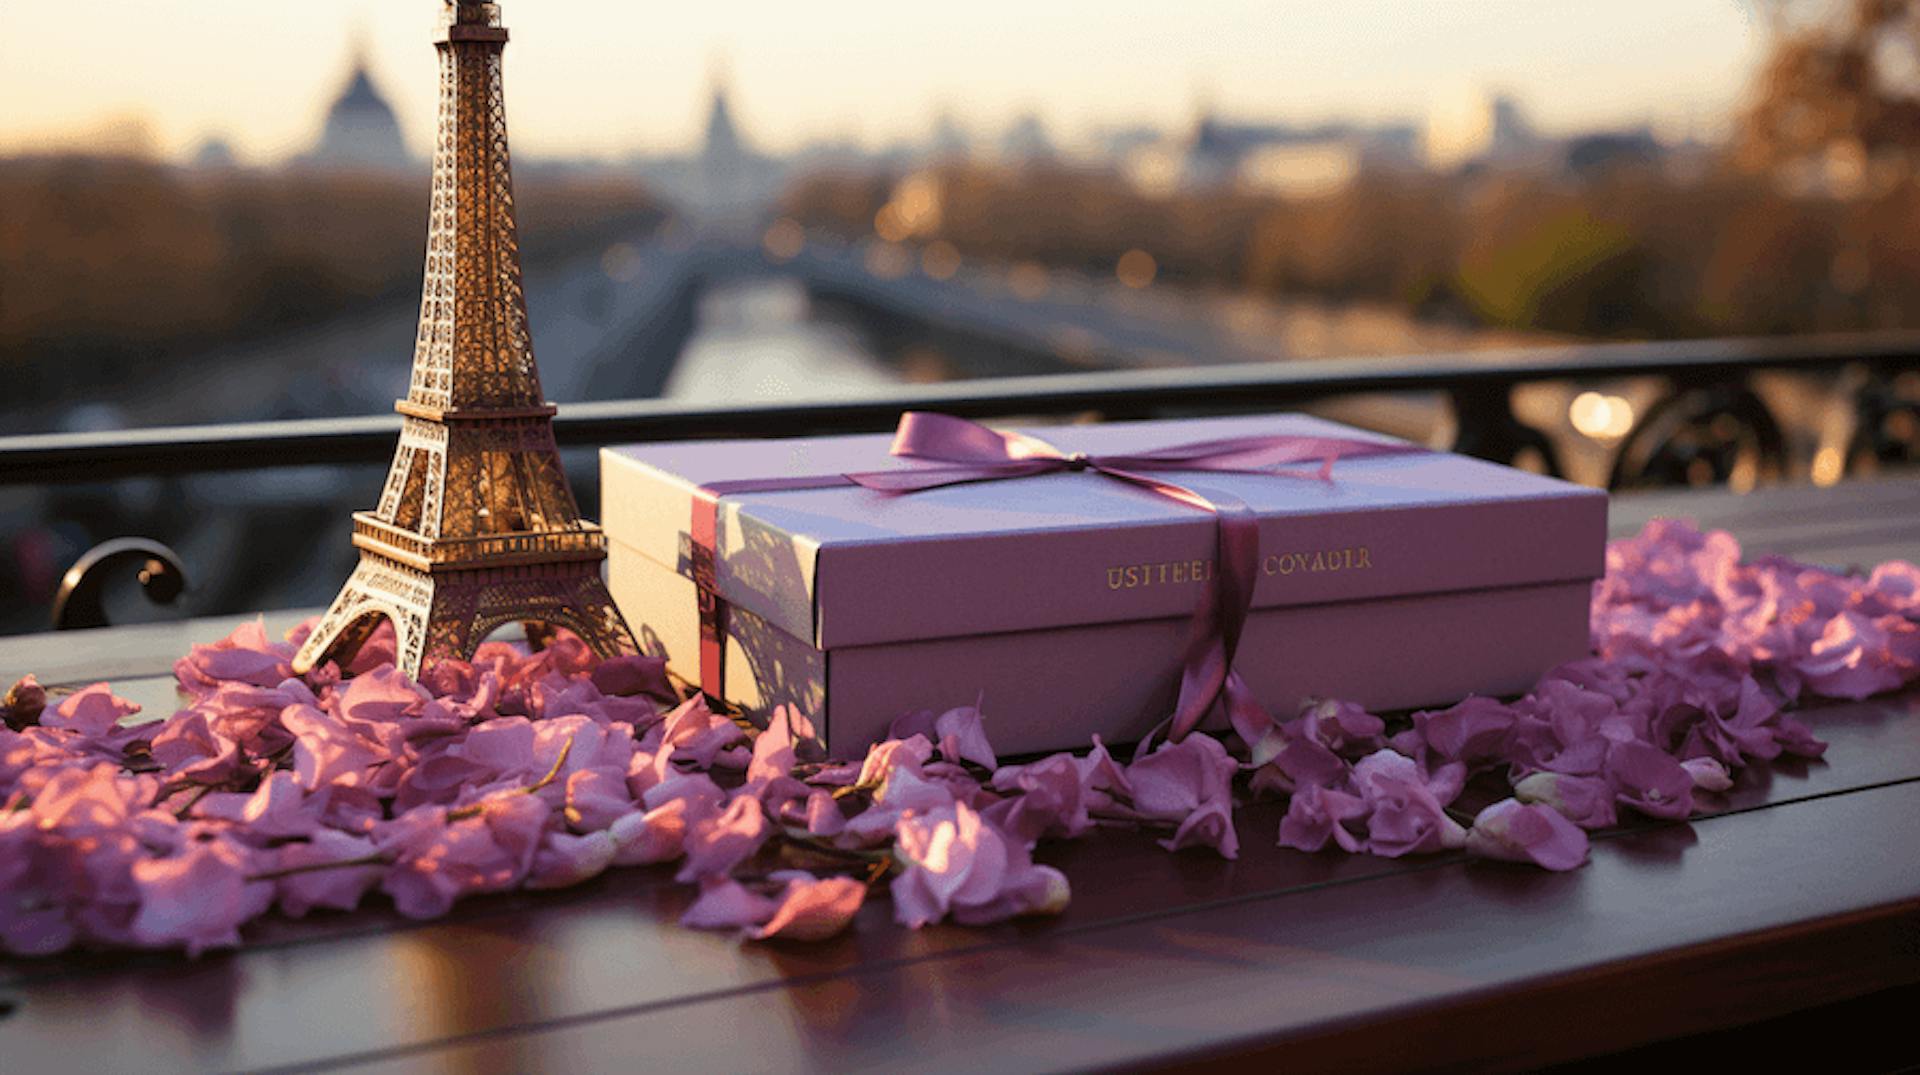 A miniature replica of the Eiffel Tower stands beside a lavender gift box with a ribbon